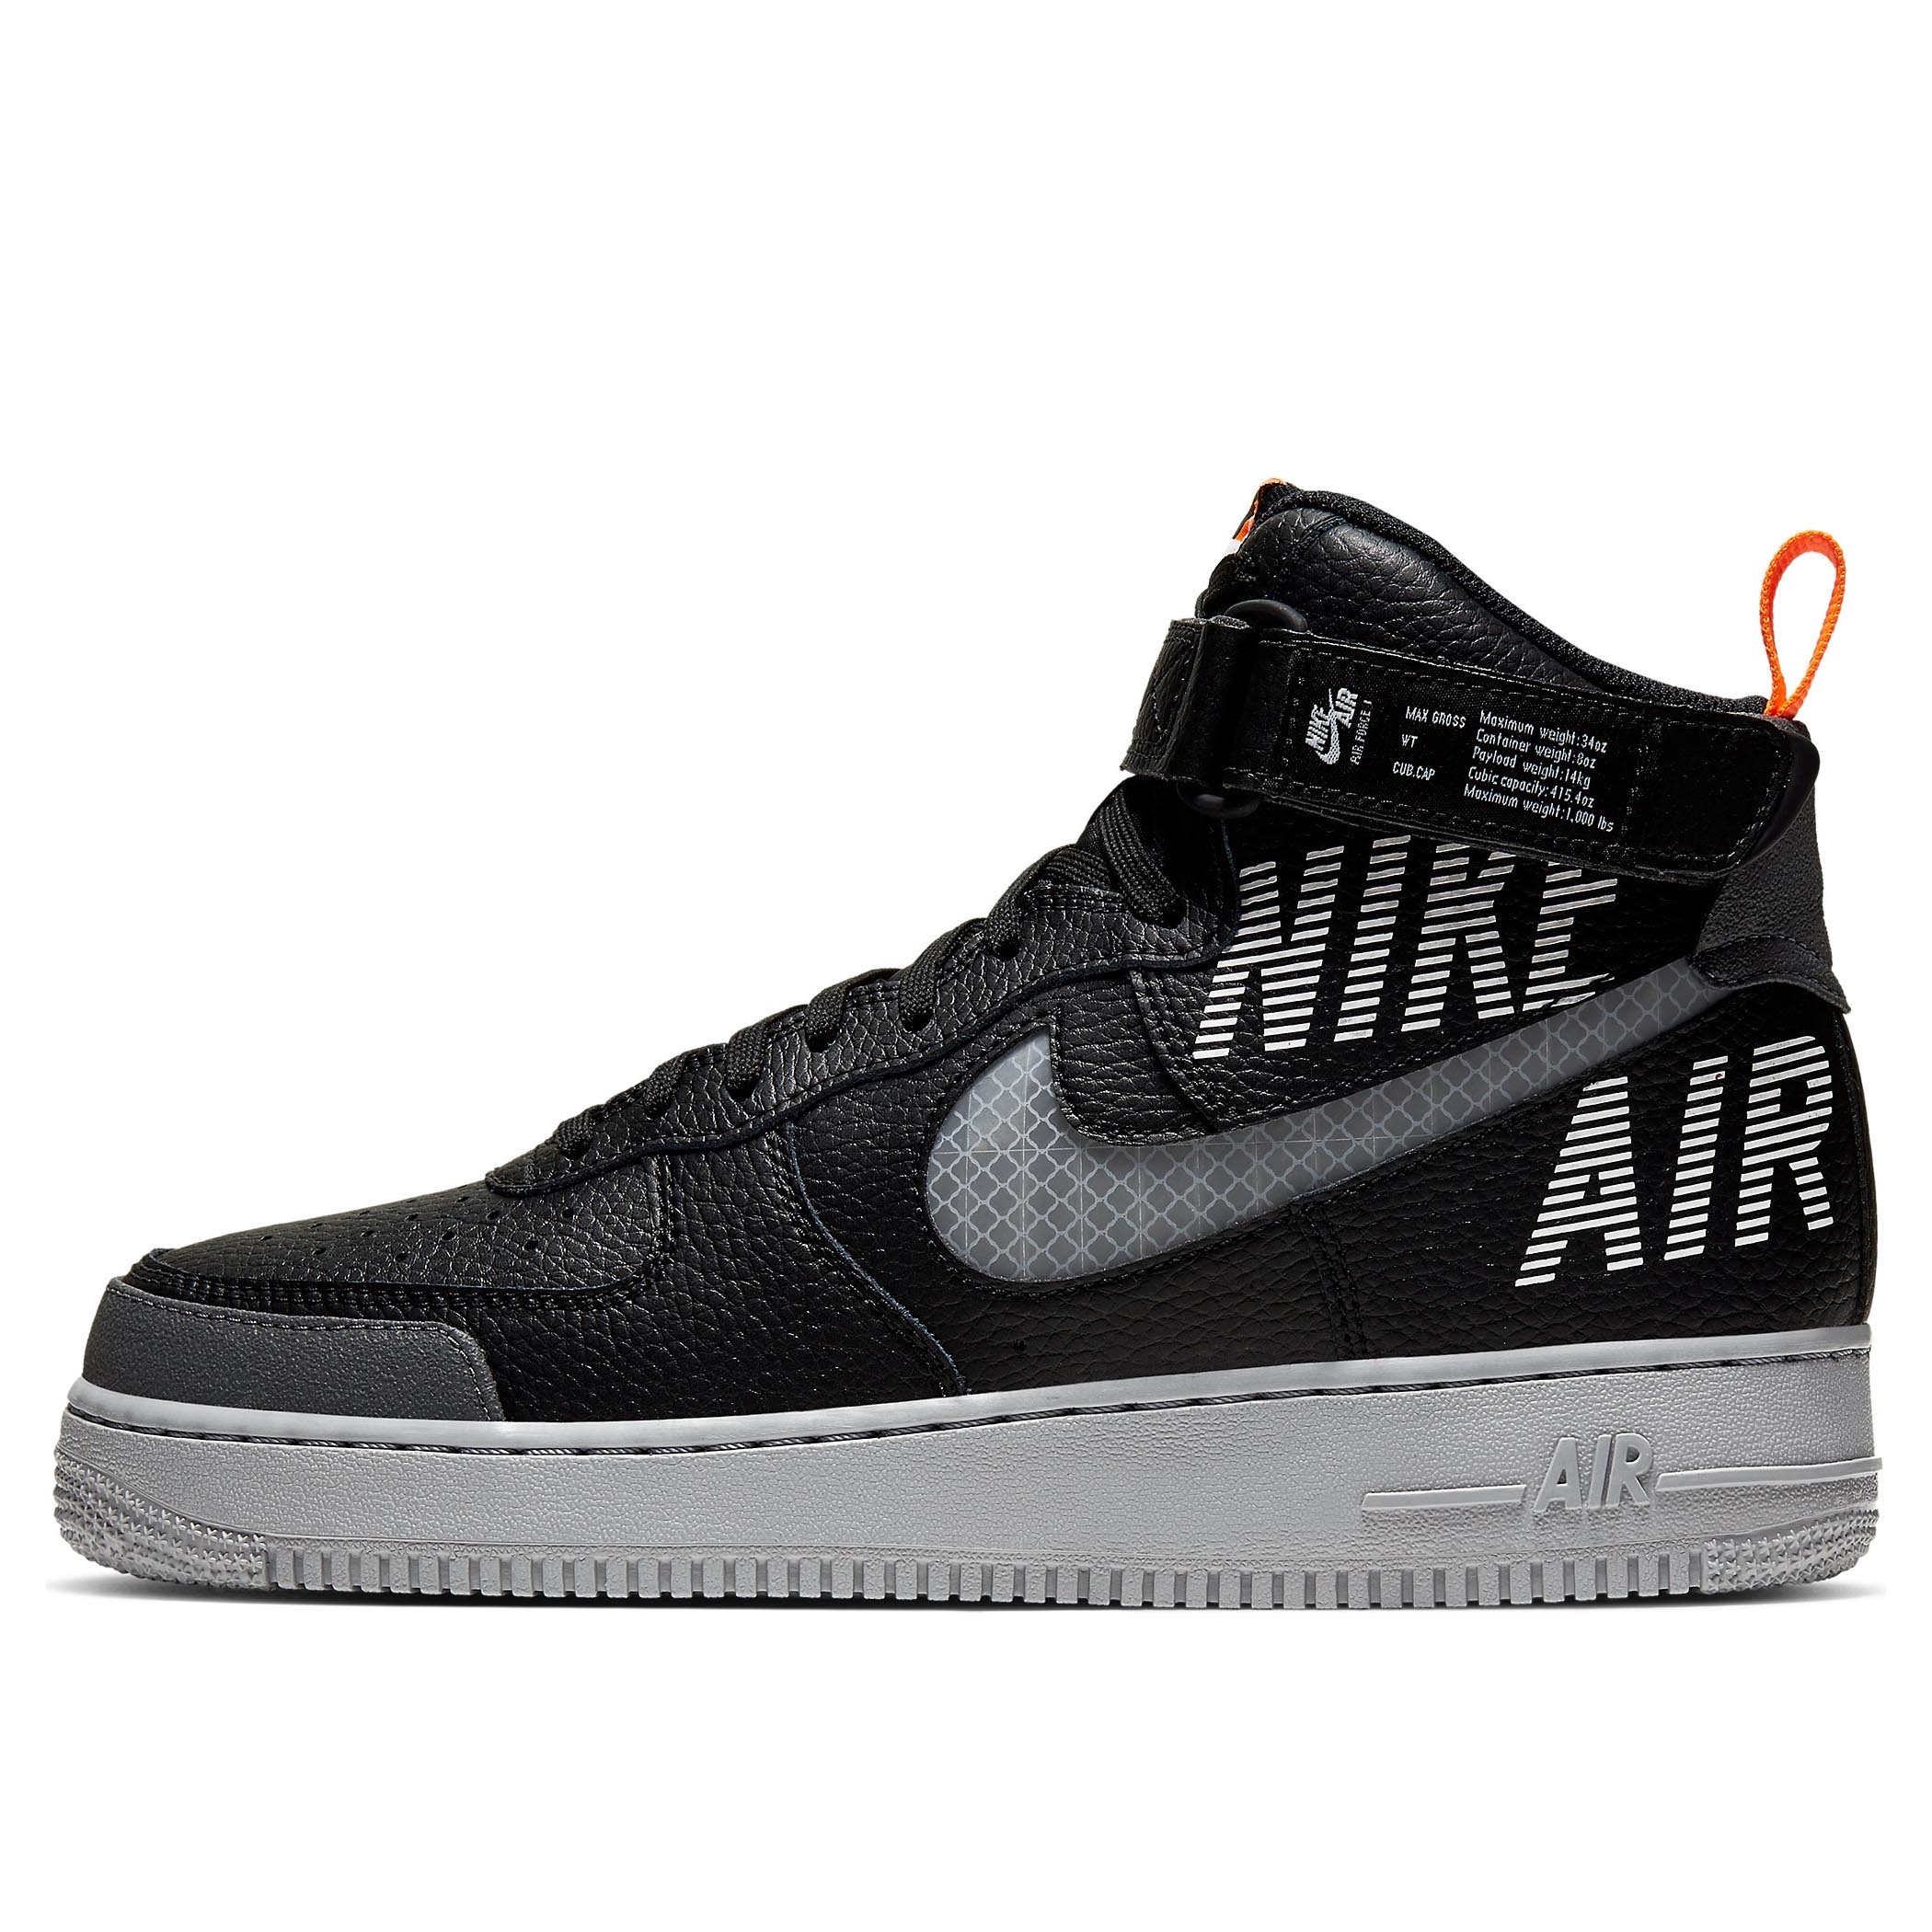 nike air force 1 weight in lbs